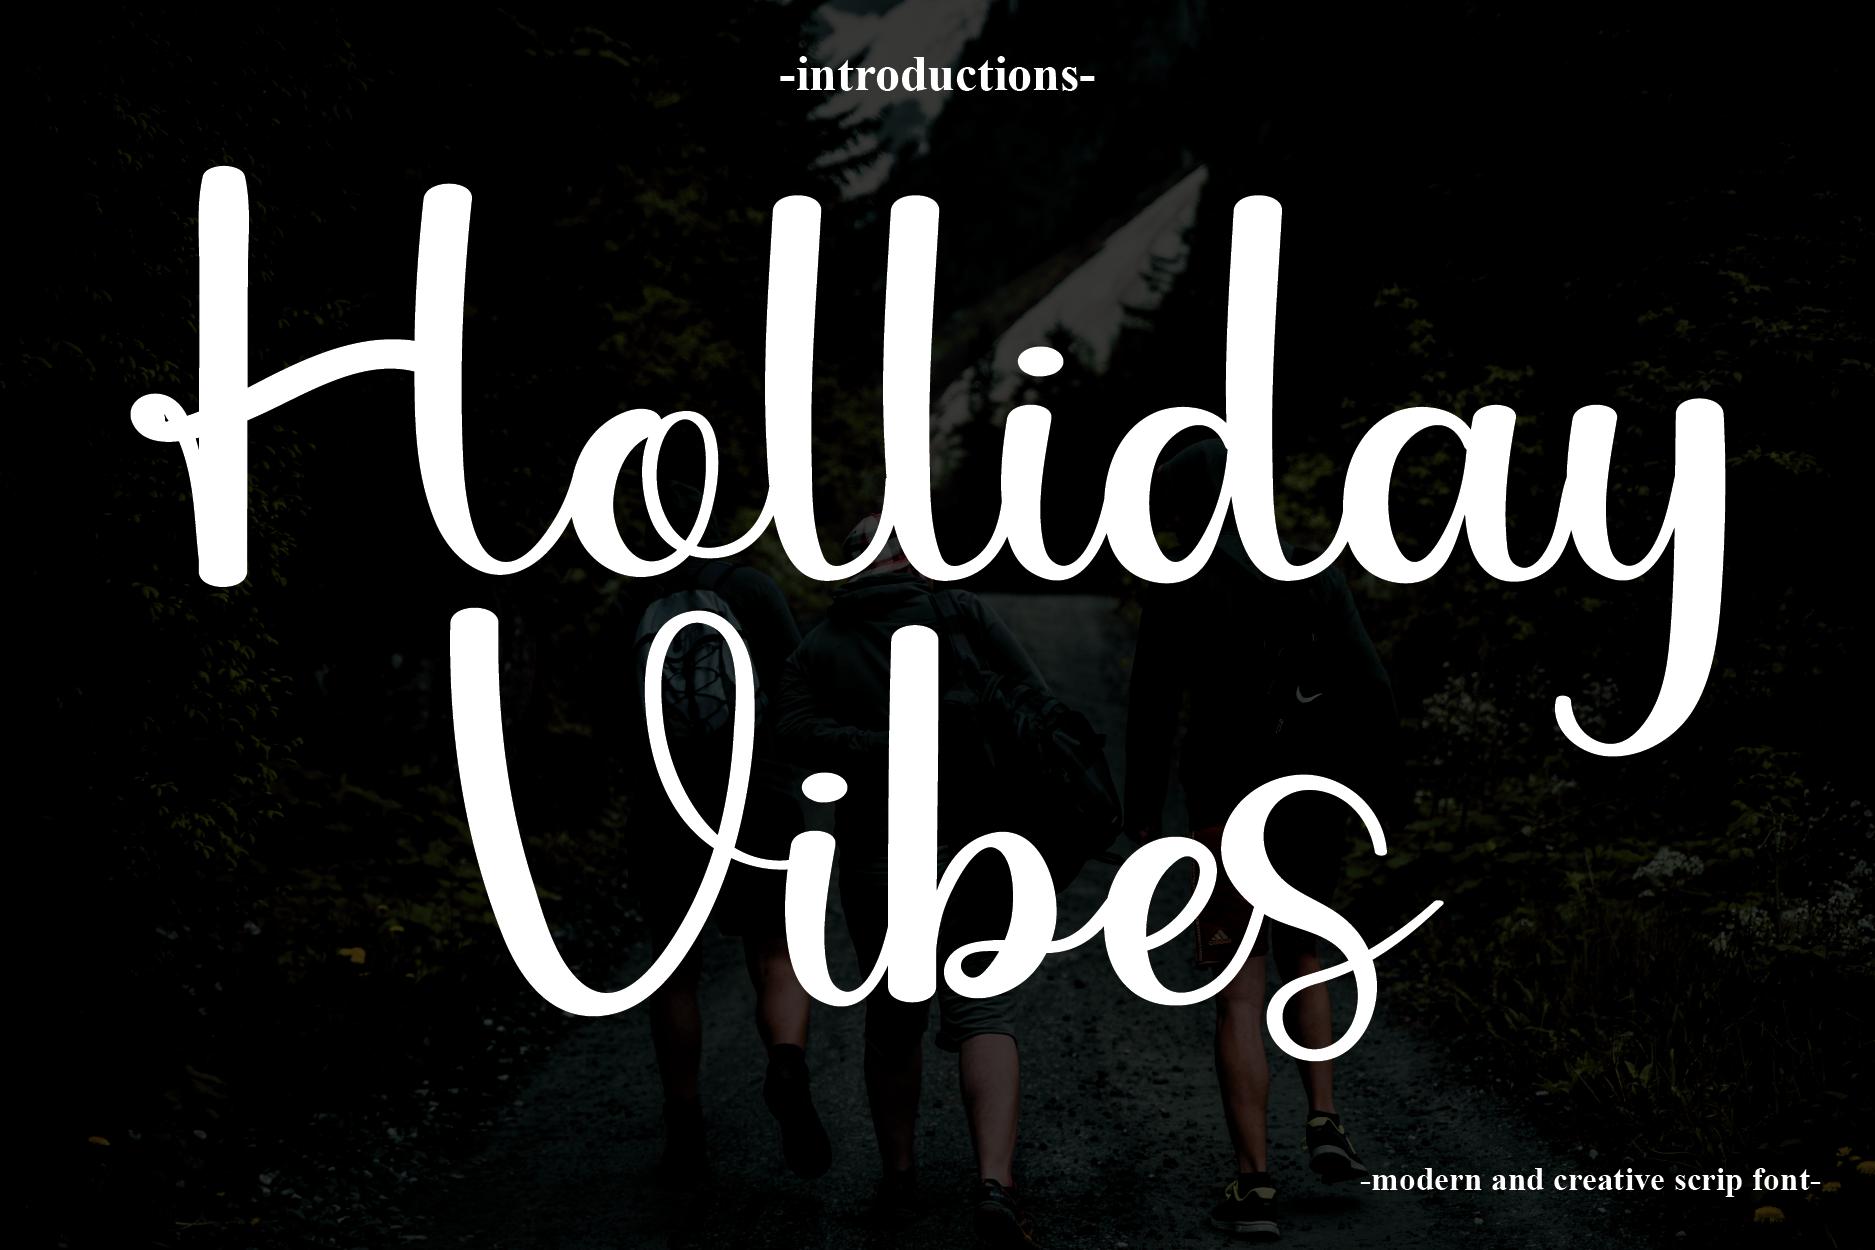 Holliday Vibes Font